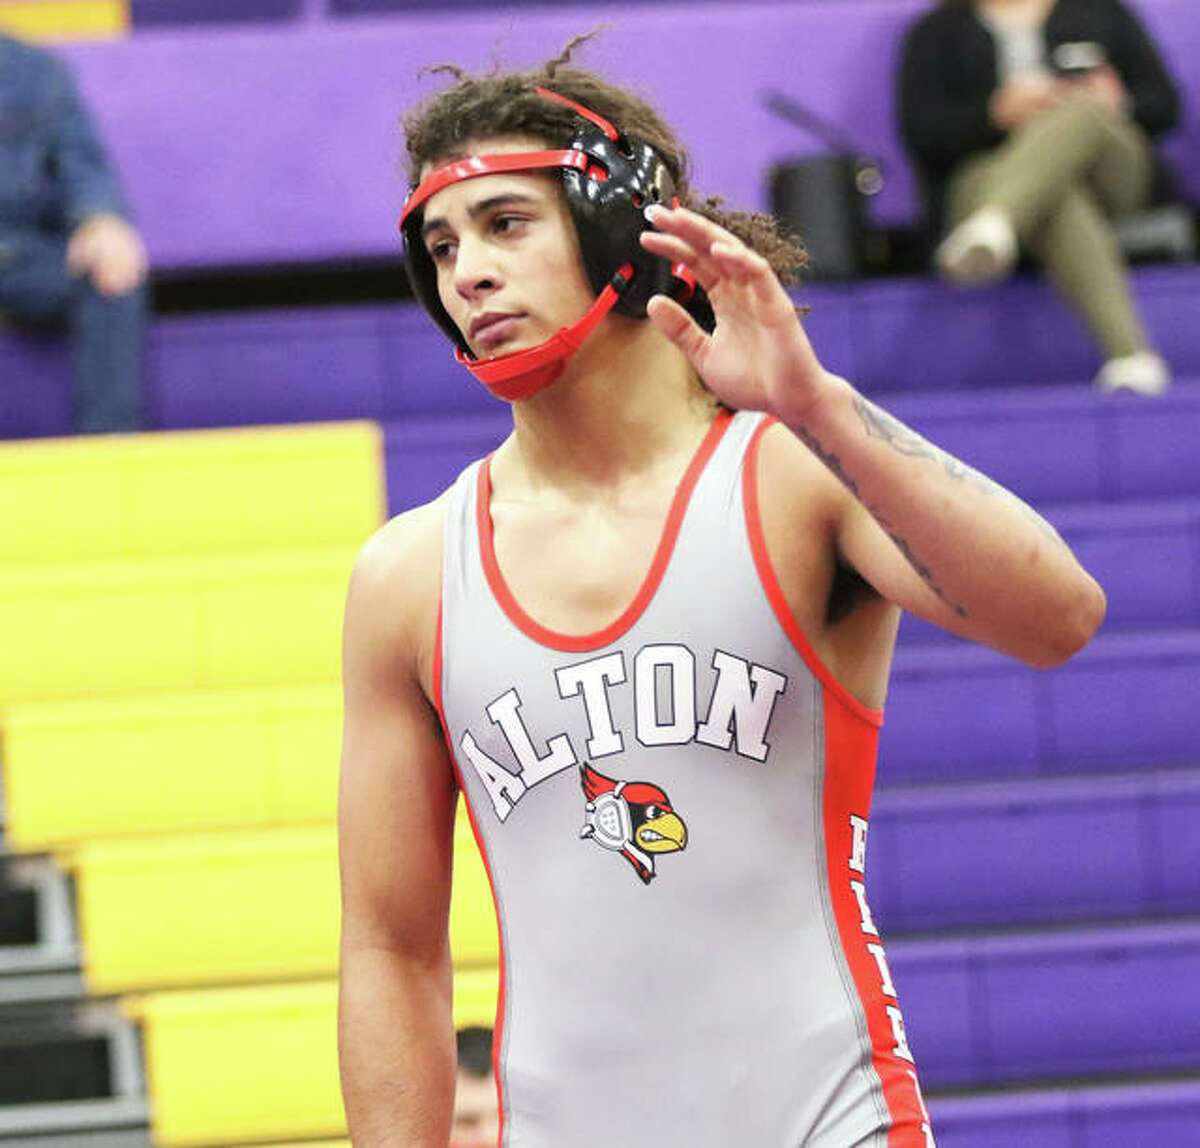 Alton senior Damien Jones, shown after a victory earlier in the season, earned a fifth-place medal at 182 pounds Saturday in the IWCOA Class 3A wrestling state meet in Springfield. Jones finished his season with a 25-3 record.